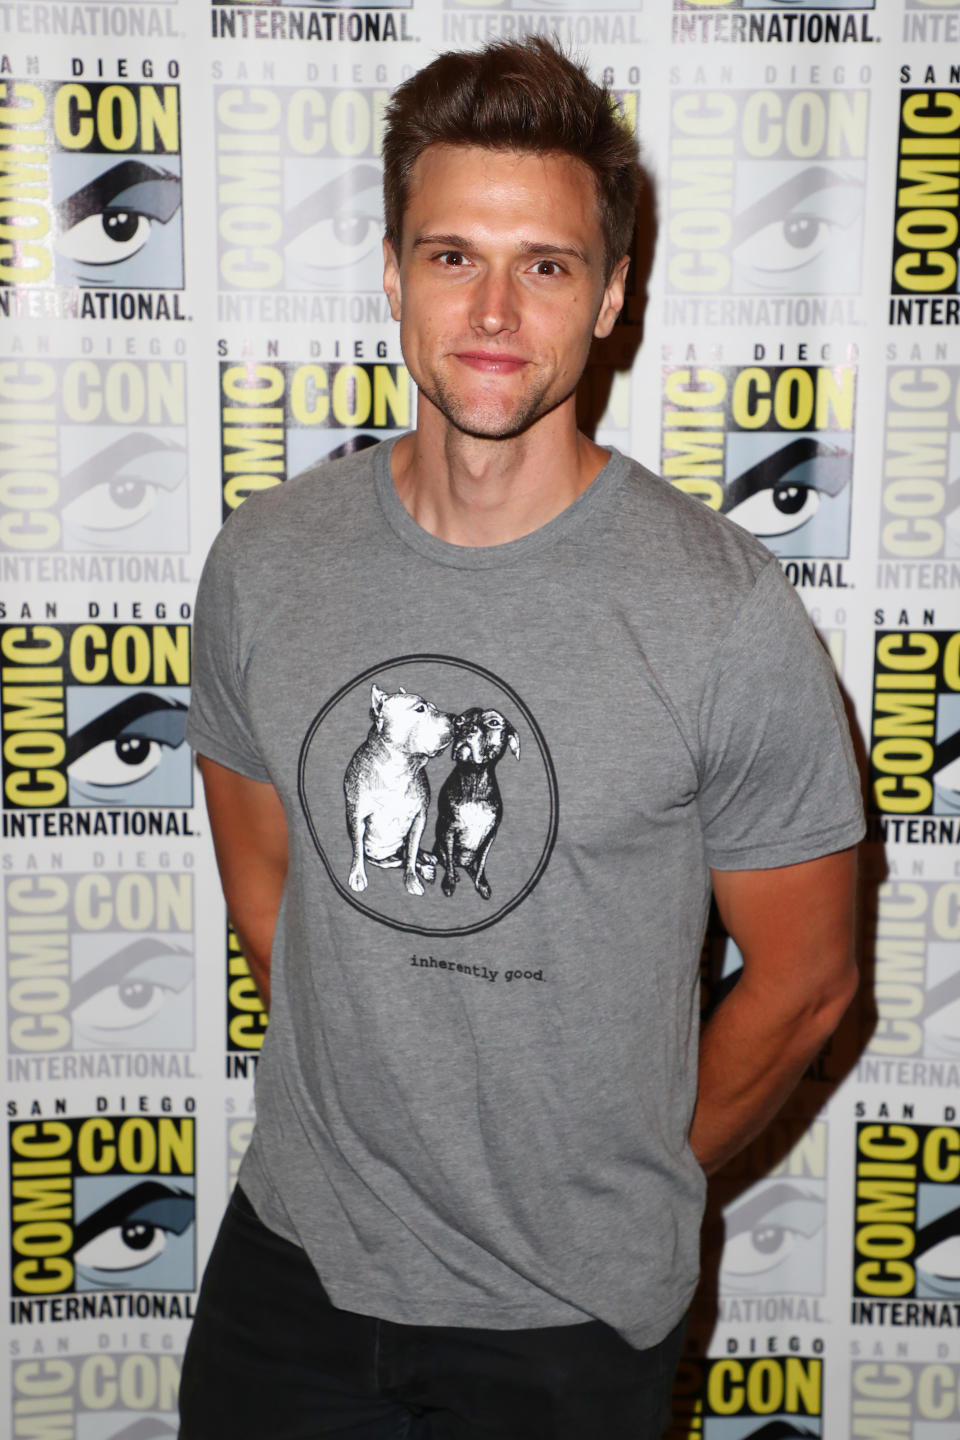 Close-up of Hartley at a media event wearing a T-shirt